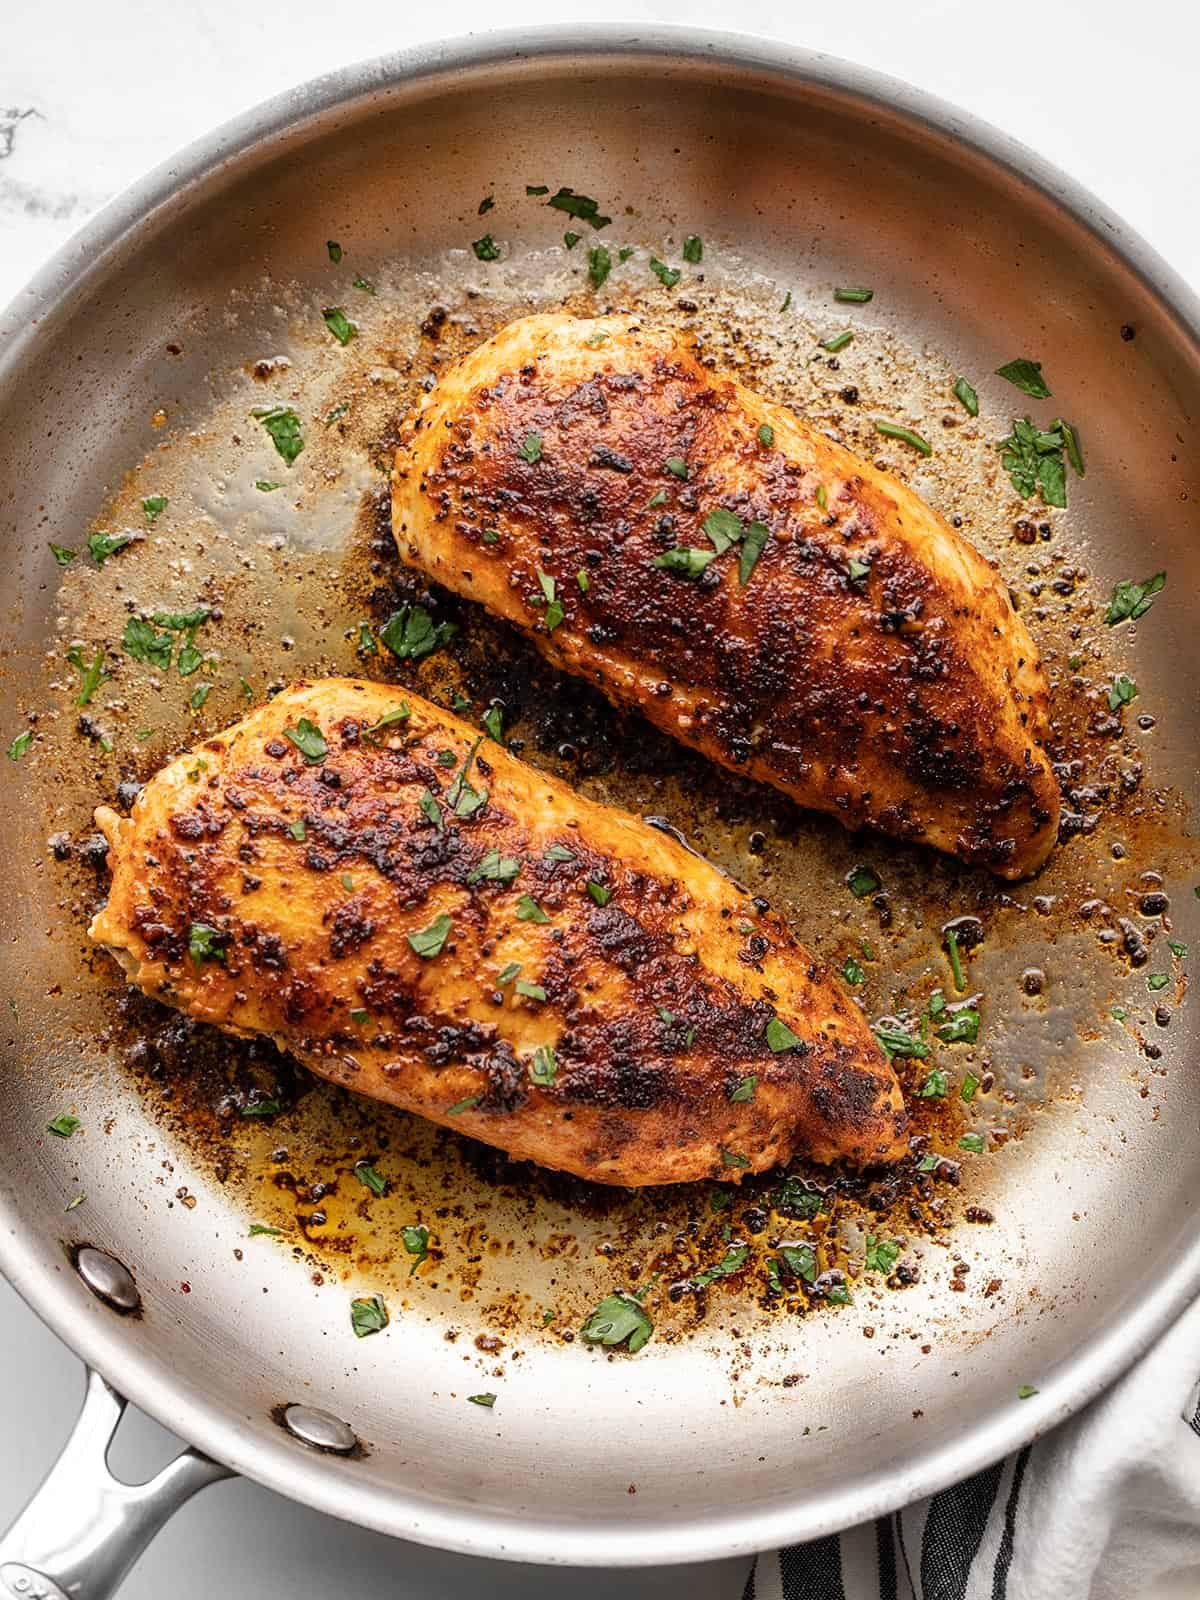 Two chicken breasts in a skillet garnished with parsley